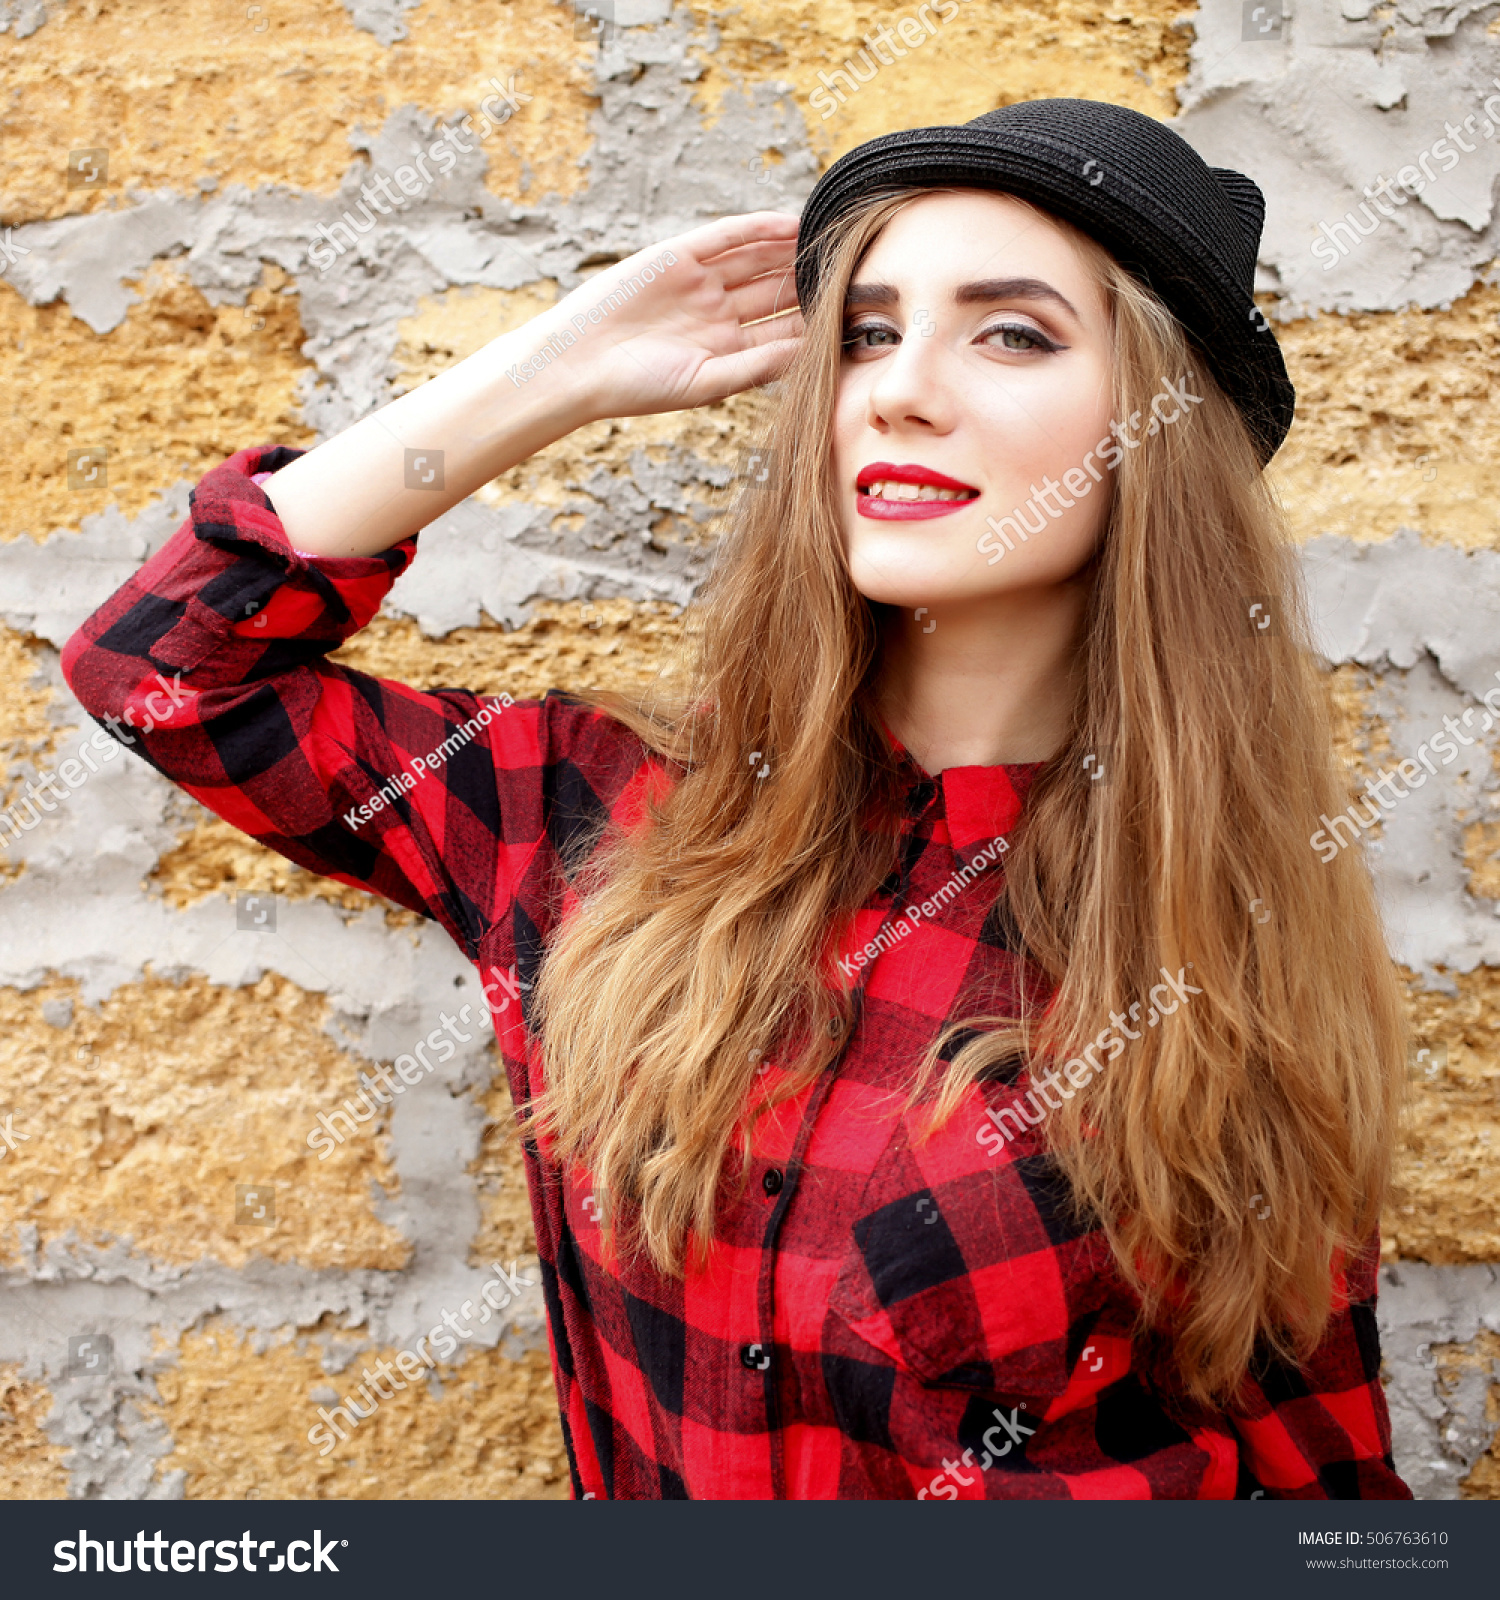 Young Hipster Girl Red Plaid Shirt Stock Photo 506763610 - Shutterstock